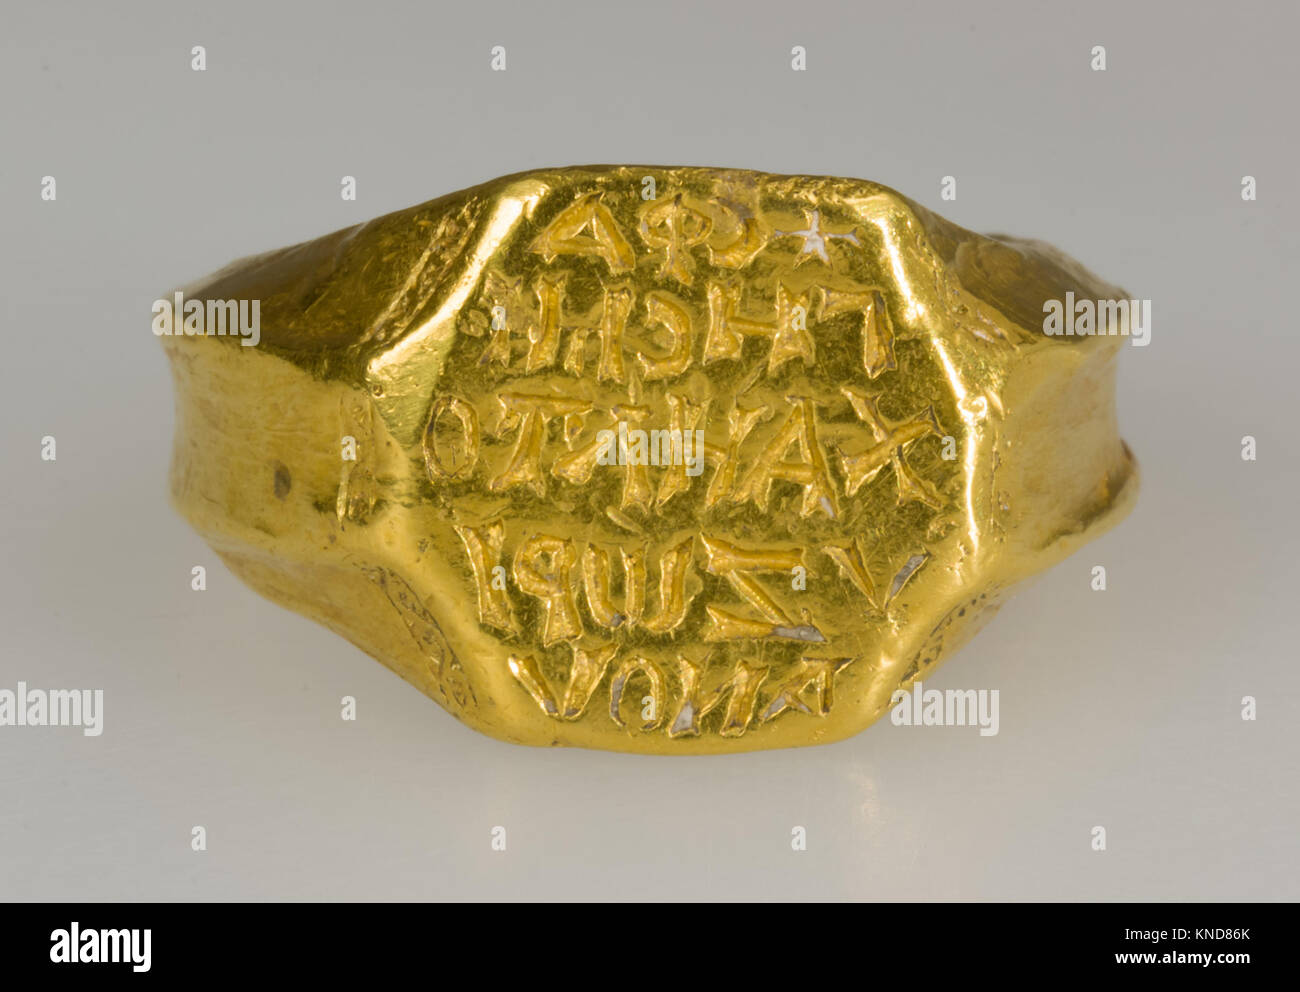 Gold Signet Ring of Michael Zorianos MET LC 18 145 42 s8 465925 Byzantine, Gold Signet Ring of Michael Zorianos, ca. 1300, Gold, 9/16 ? 15/16 in., 0.882oz. (1.4 ? 2.4 cm, 25g) Bezel: 9/16 ? 1/2 in. (1.4 ? 1.3 cm) Inside circumference: 2 1/4 in. (5.7 cm) . The Metropolitan Museum of Art, New York. Rogers Fund, 1918 (18.145.42) Stock Photo